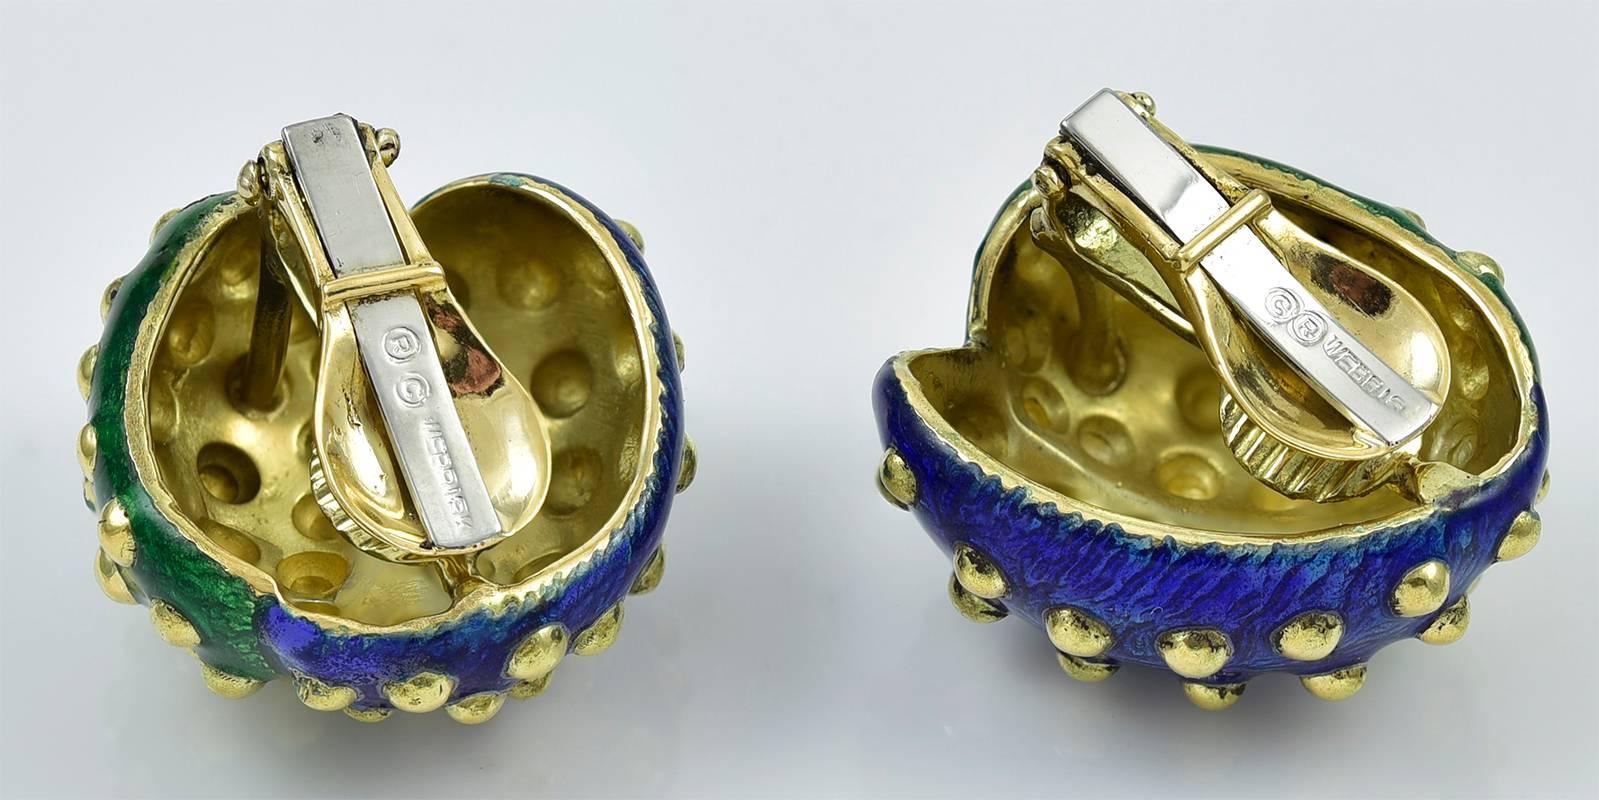 Very attractive ear clips.  Made and signed by DAVID WEBB. 18K yellow gold. Emerald green and sapphire blue enamel, with raised gold dots.  1